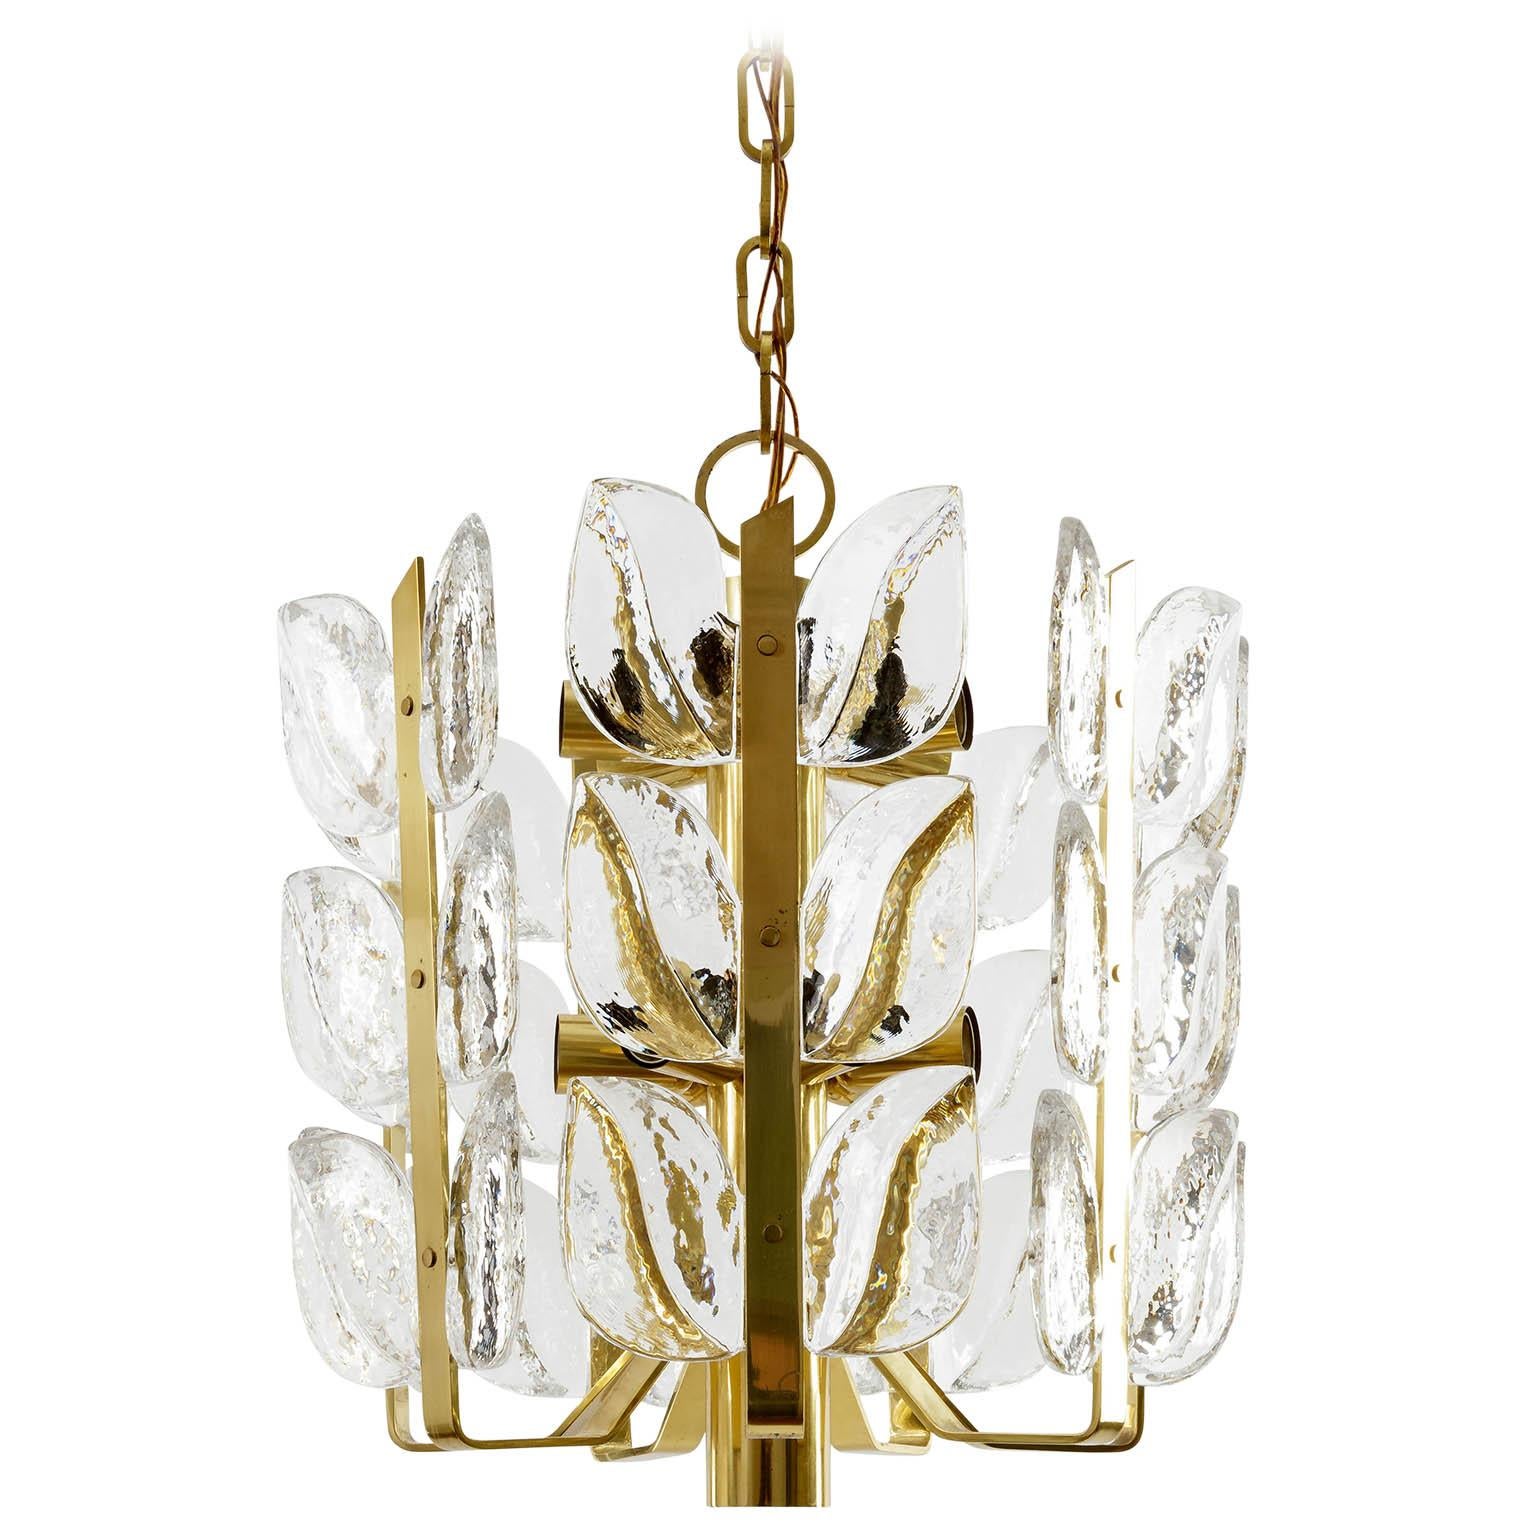 A beautiful and handmade high quality light fixture model 'Florida' by J.T. Kalmar, Austria, manufactured in midcentury, circa 1970 (late 1960s or early 1970s).
The lamp is made of polished brass and large fire-polished brilliant crystal glasses in